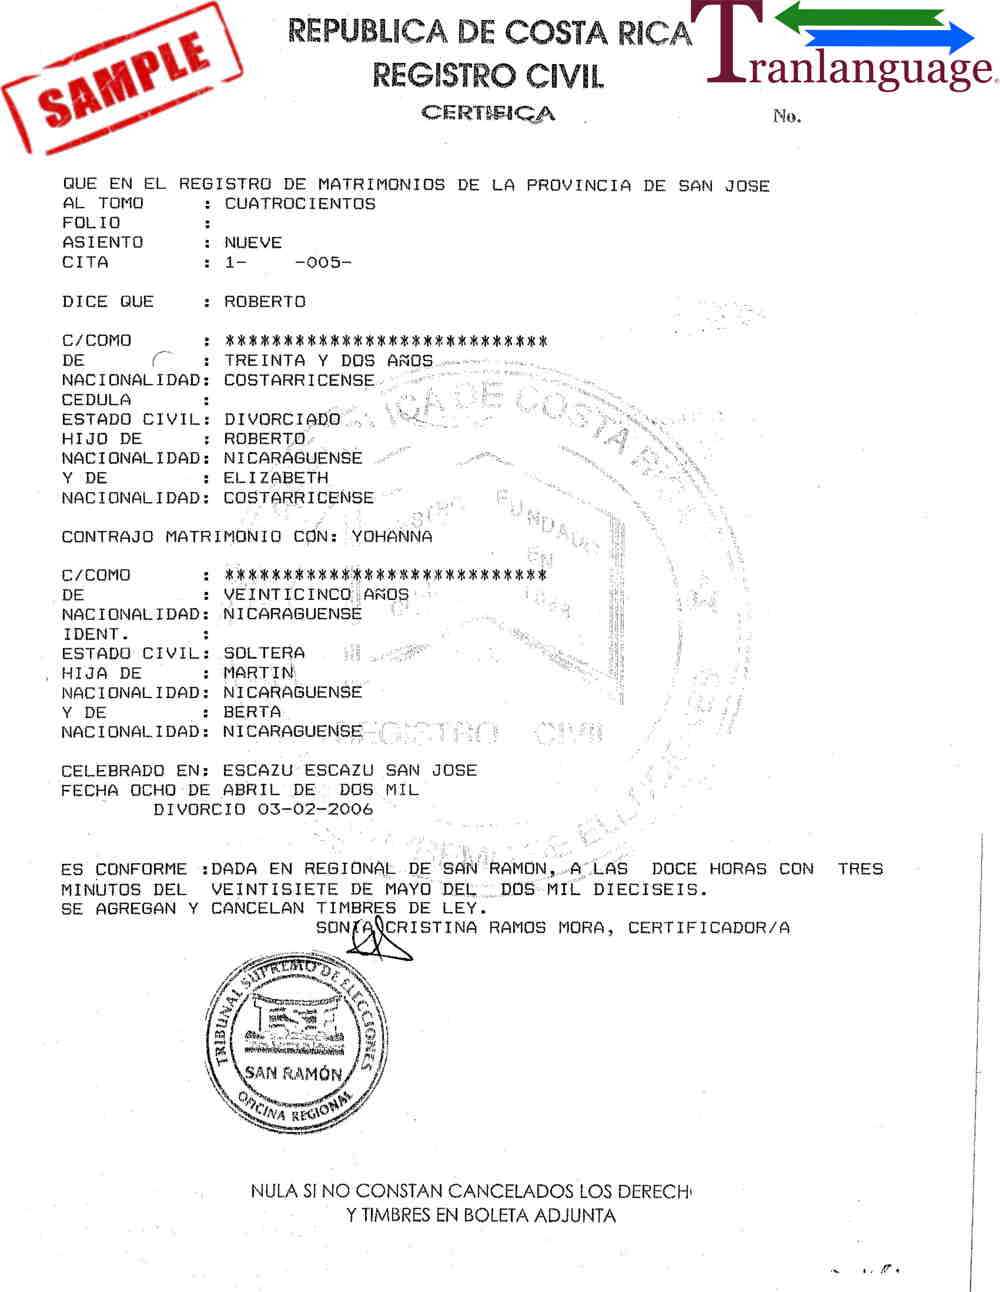 Marriage Certificate Costa Rica In Marriage Certificate Translation From Spanish To English Template